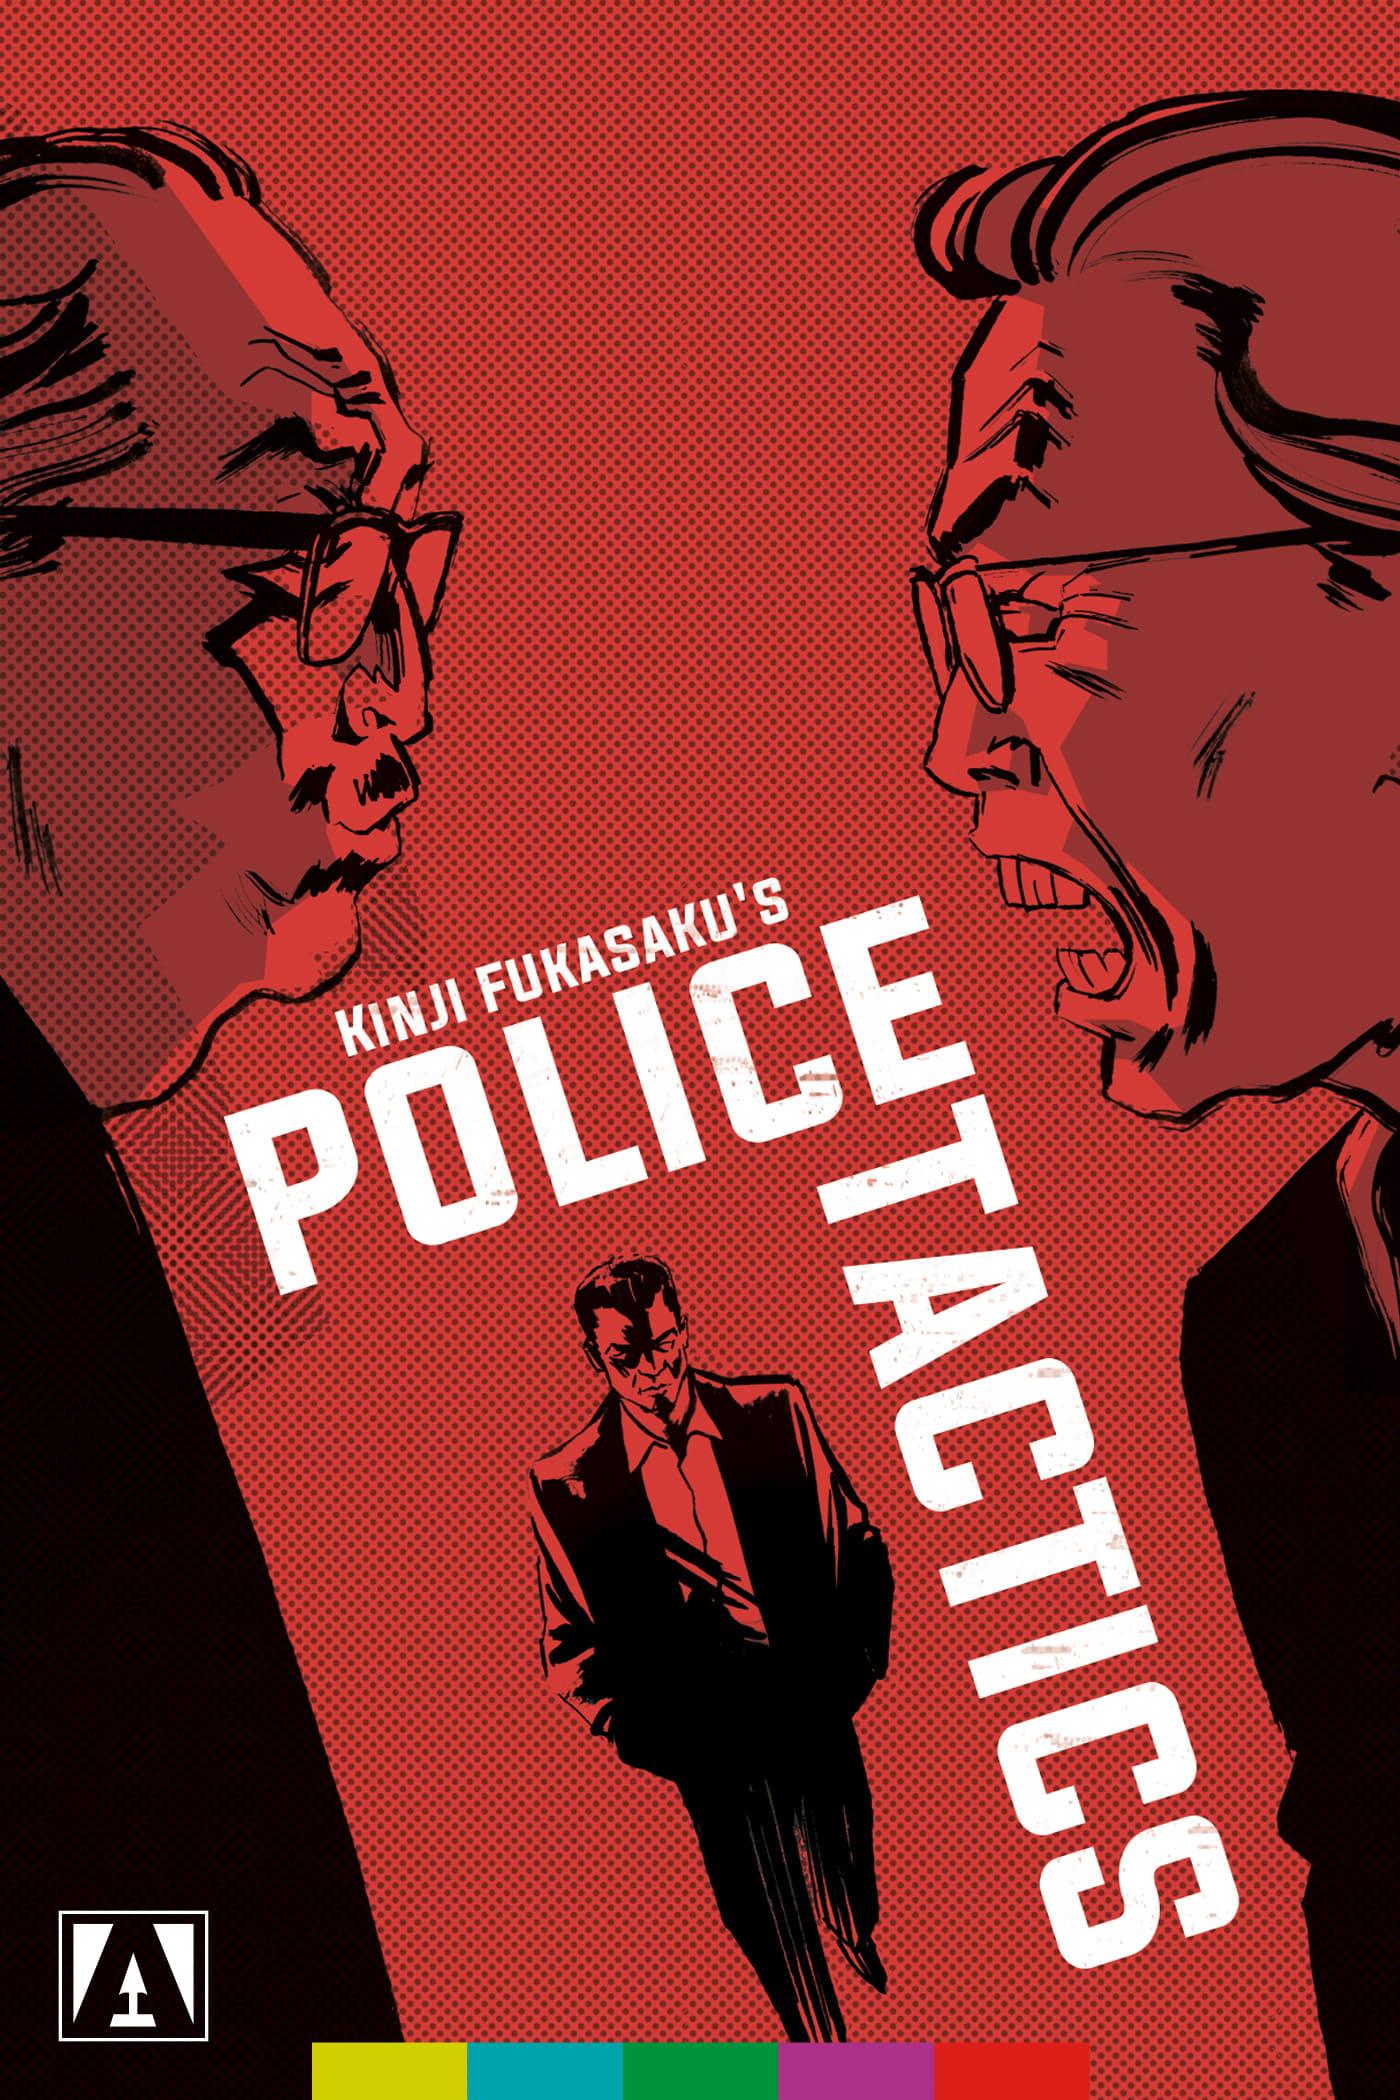 Battles Without Honor and Humanity: Police Tactics poster